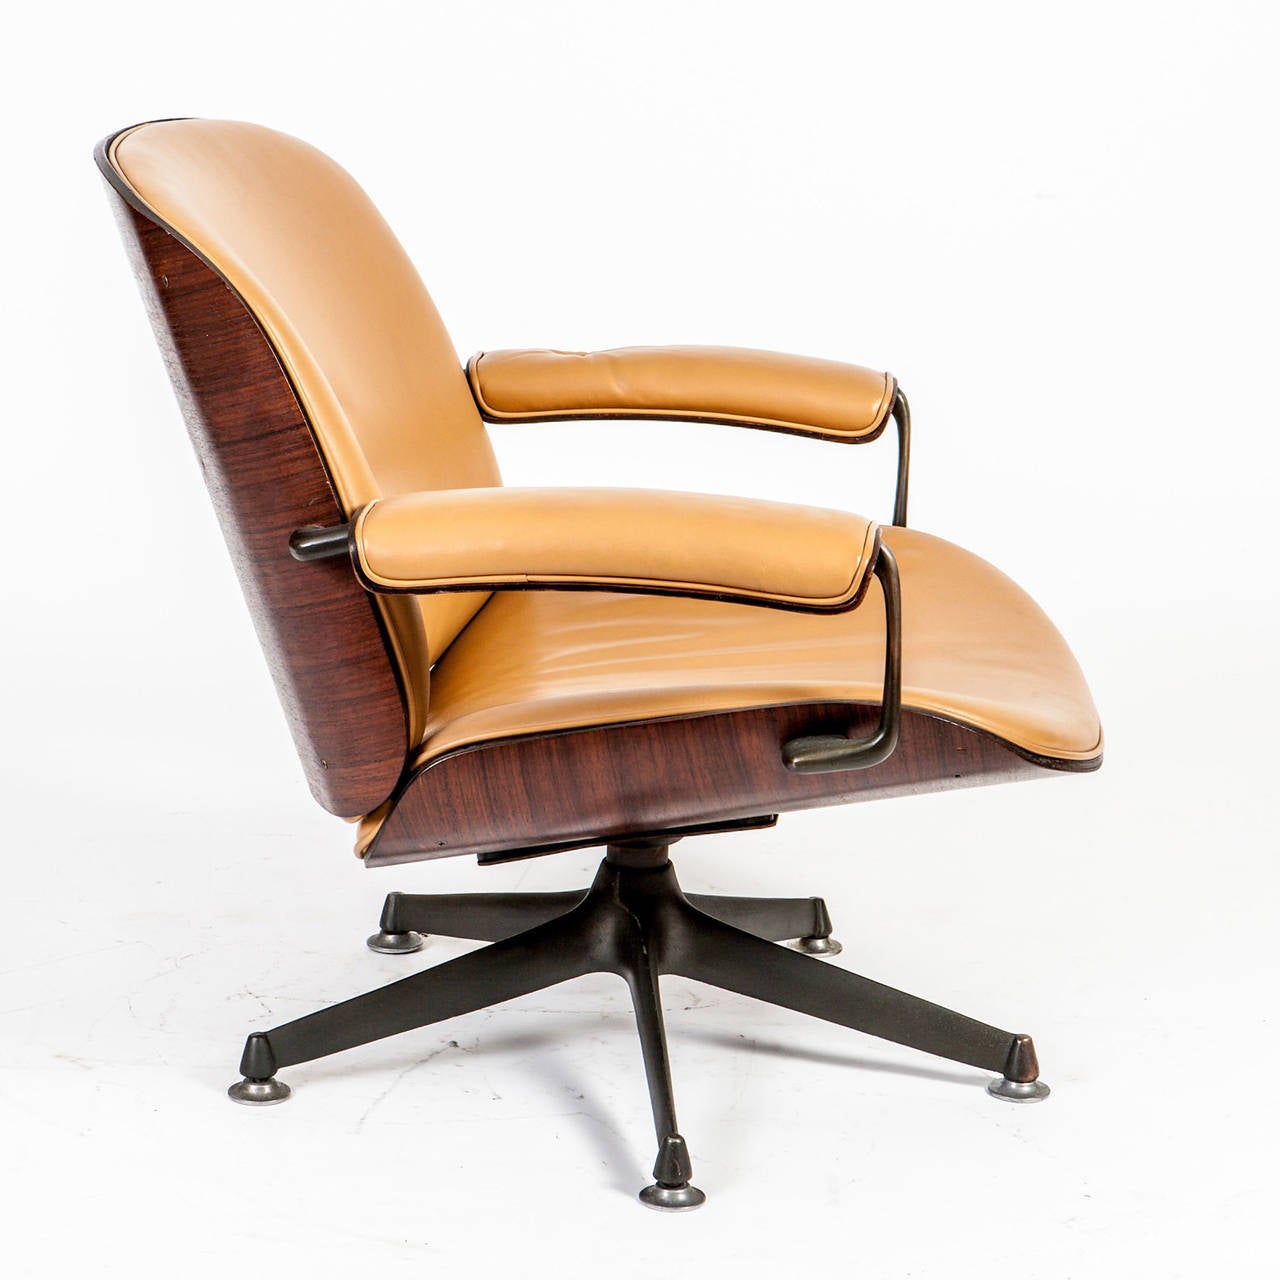 Mid-20th Century Italian Midcentury Rosewood and cognac Leather Lounge Chair by Ico Parisi 